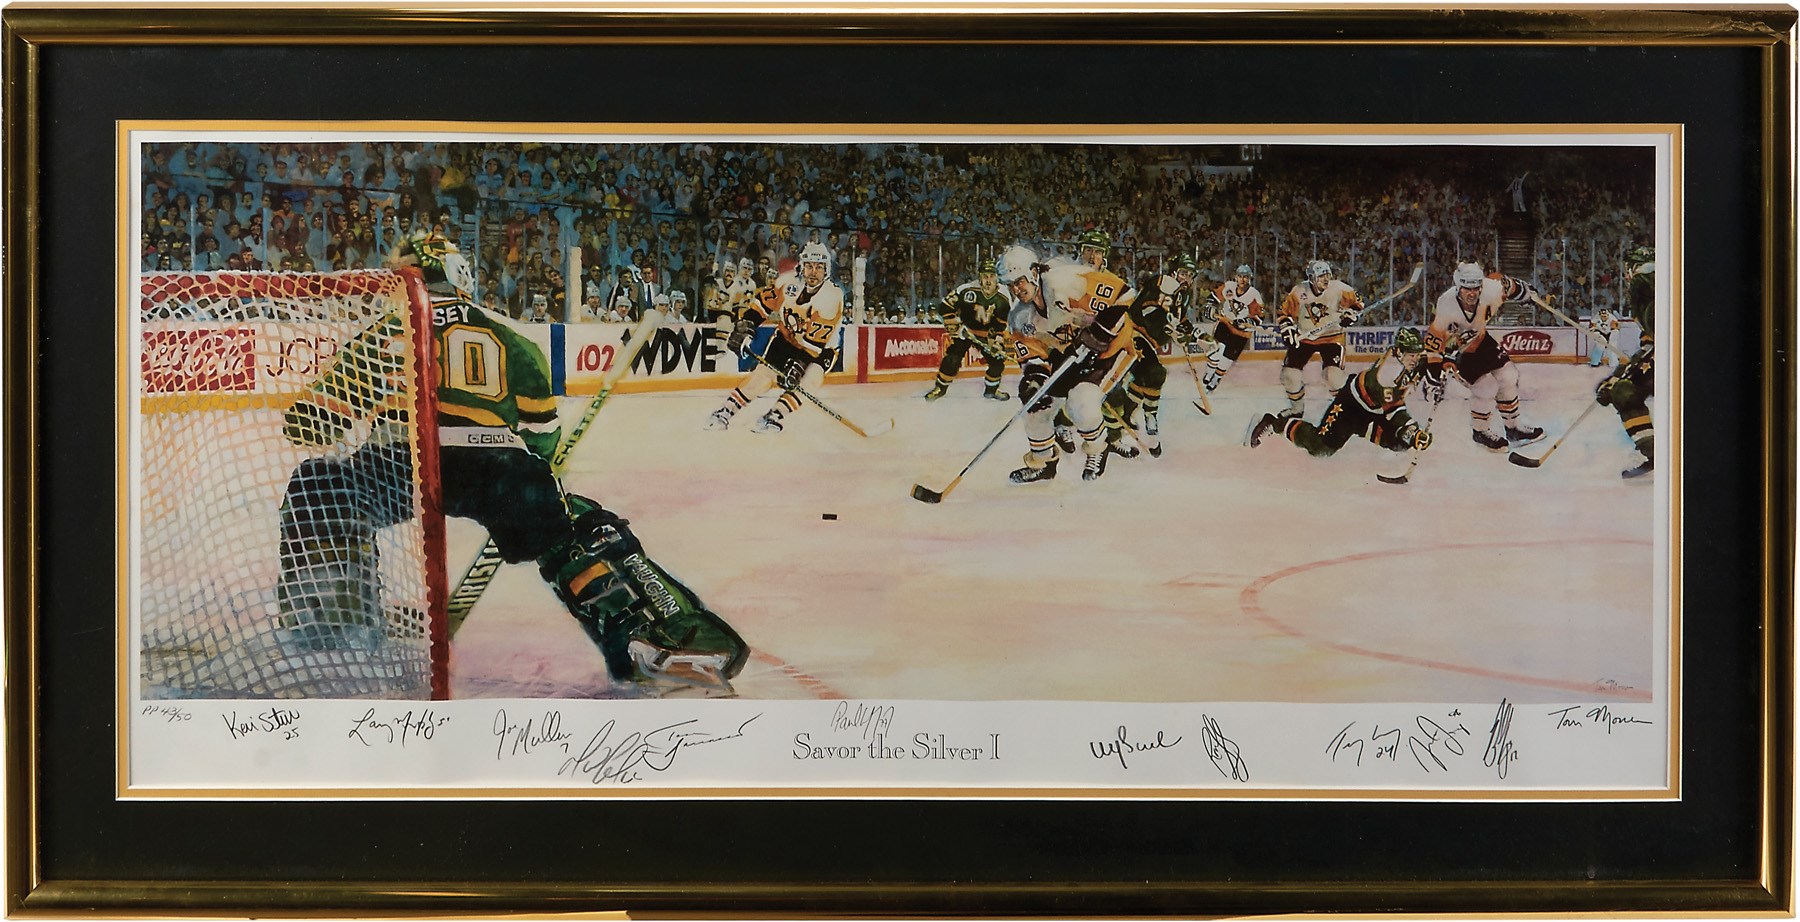 - 1990-91 Pittsburgh Penguins Stanley Cup Champions Signed Lithograph